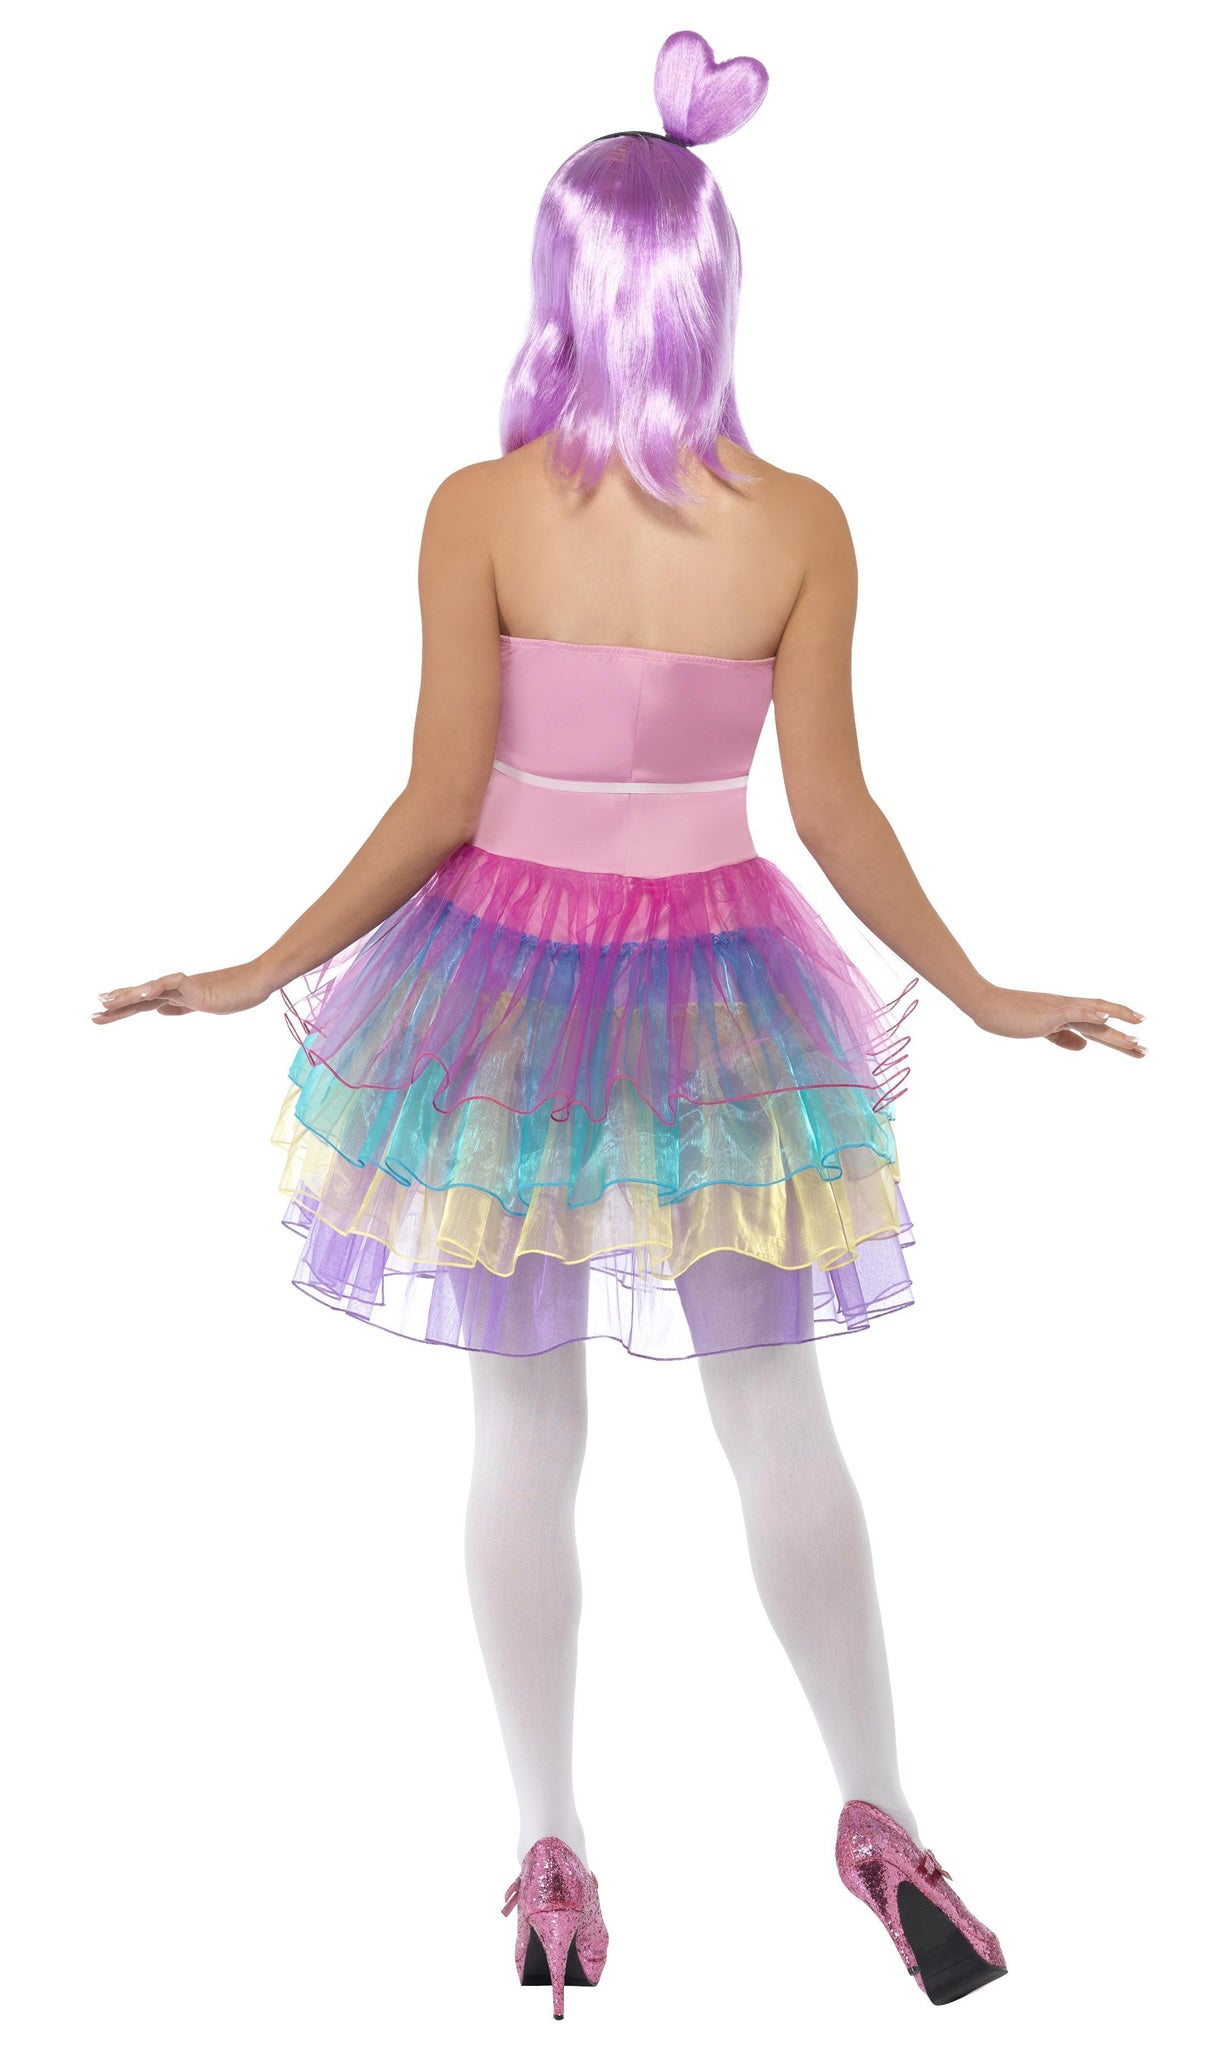 Back of Katy Perry style candy petticoat dress